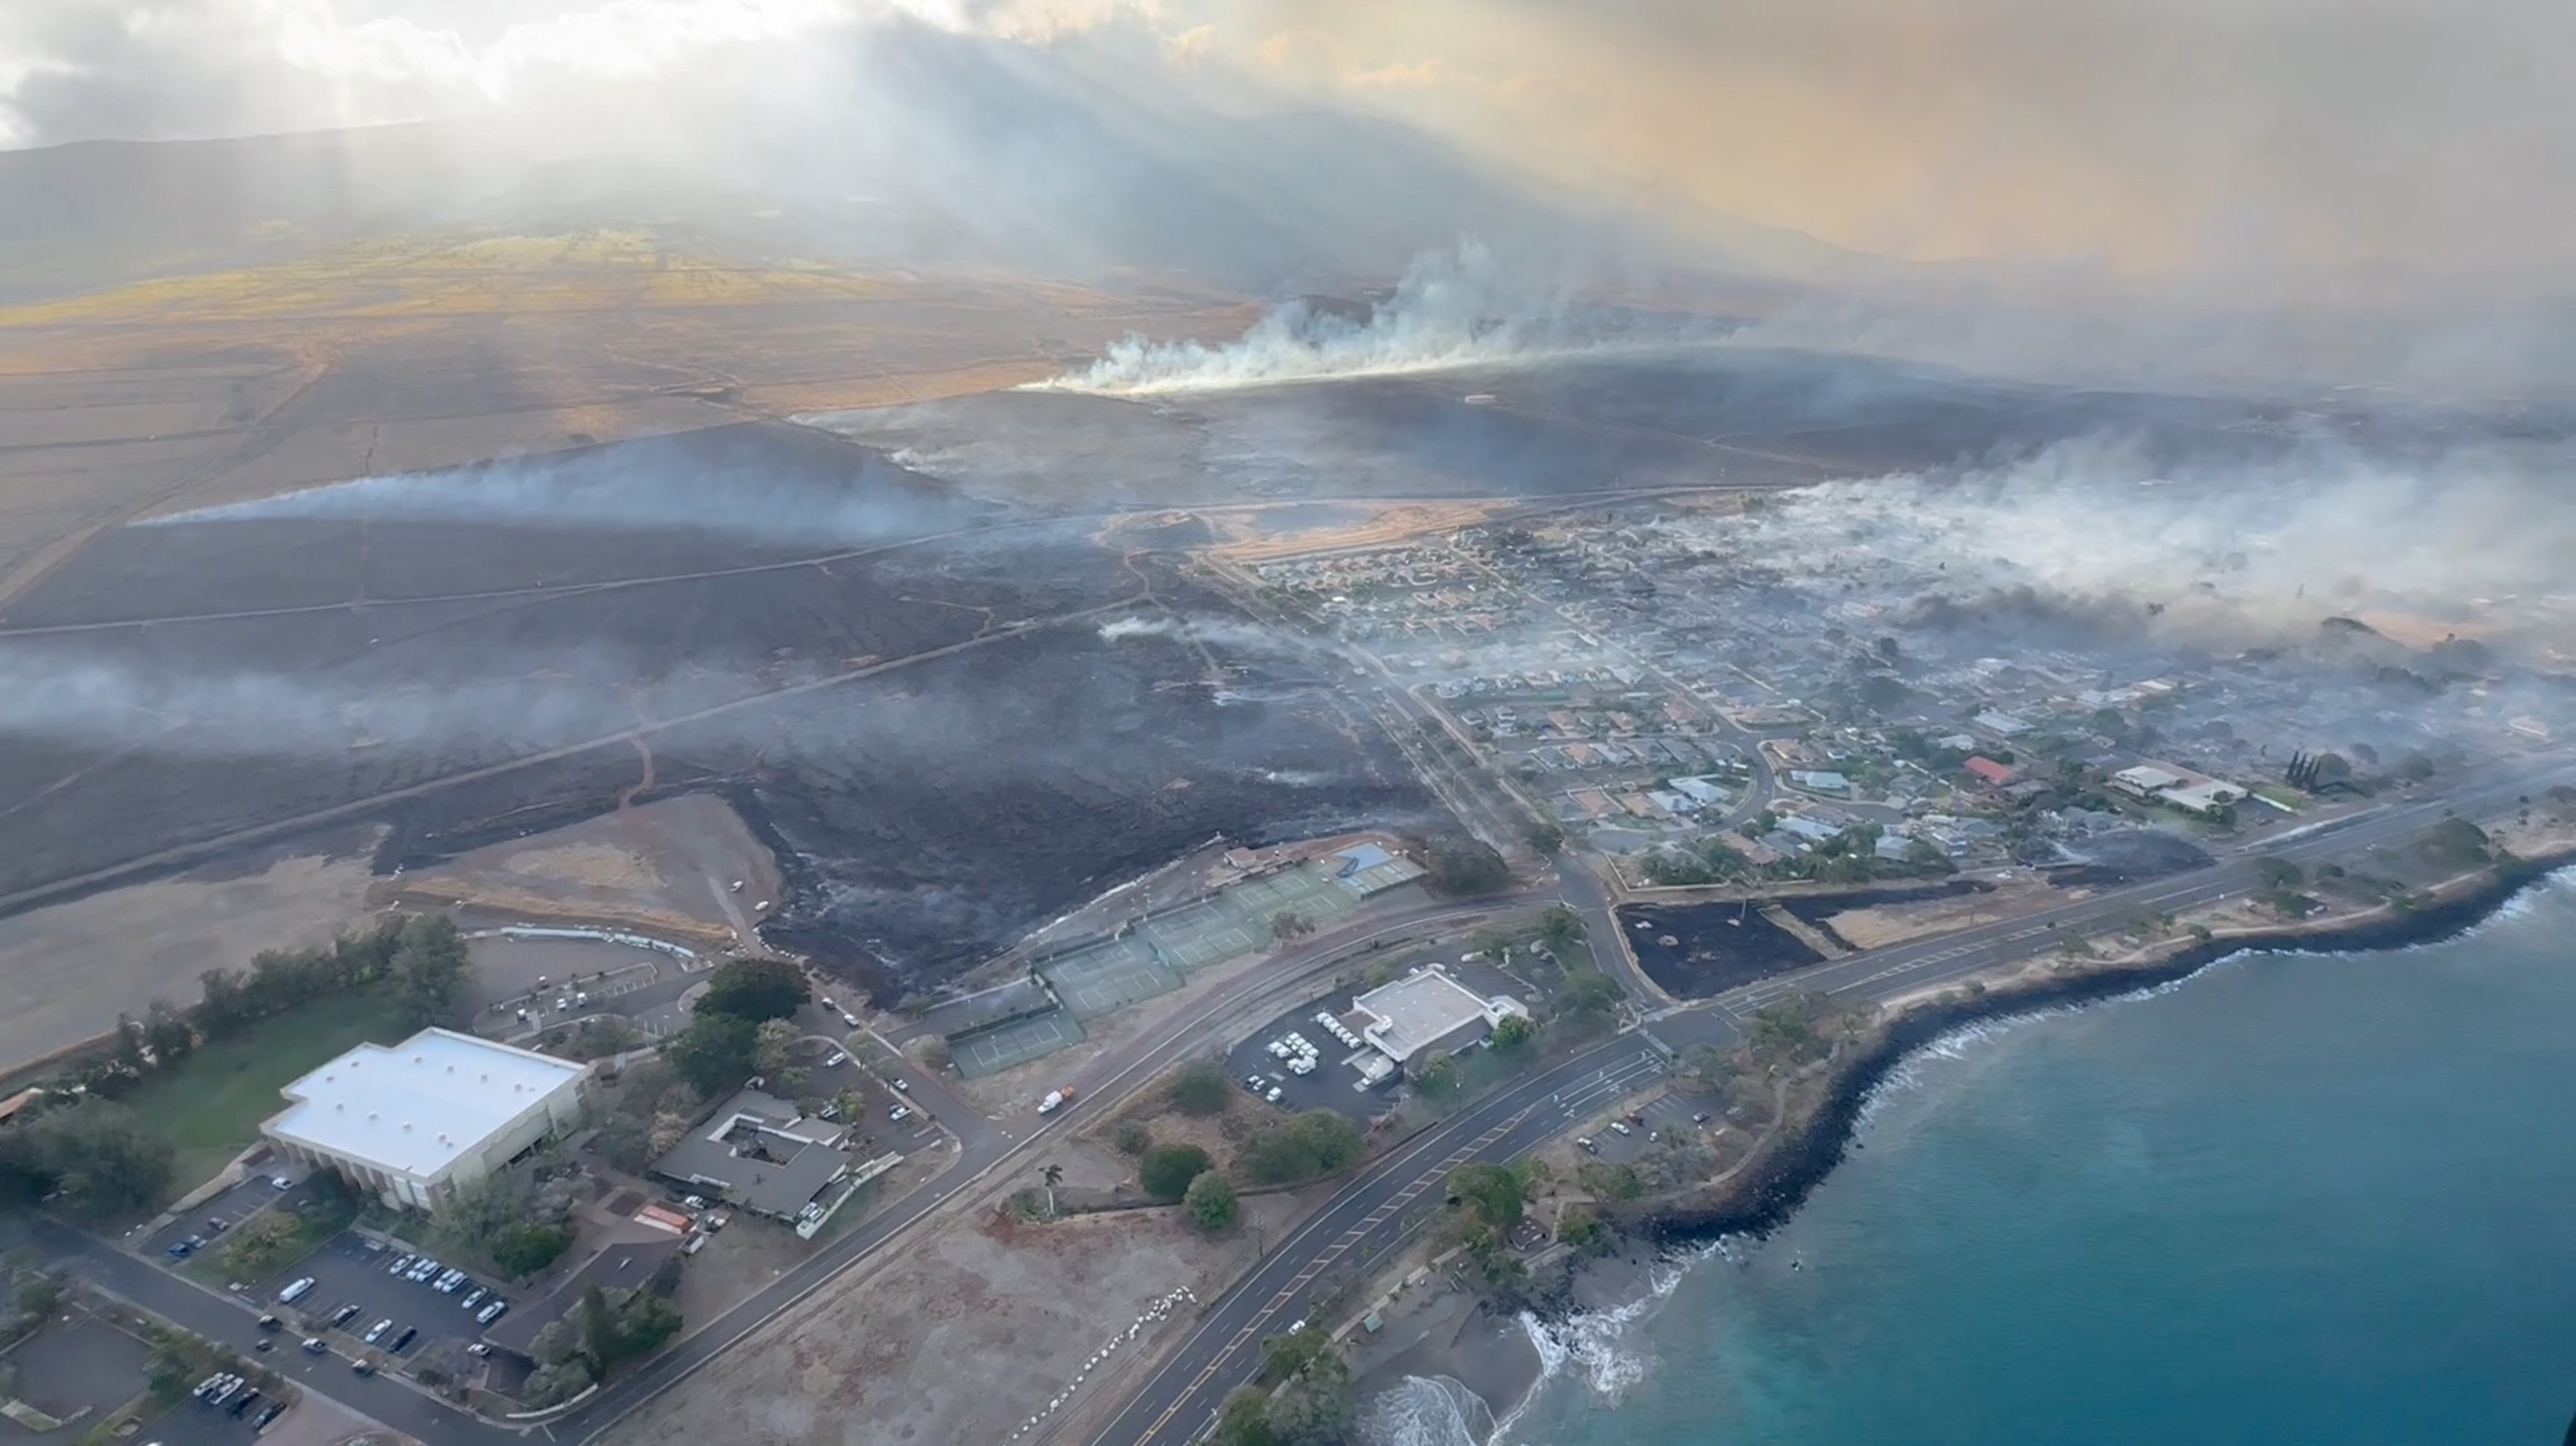 Aerial view of Lahaina coast in the aftermath of wildfires